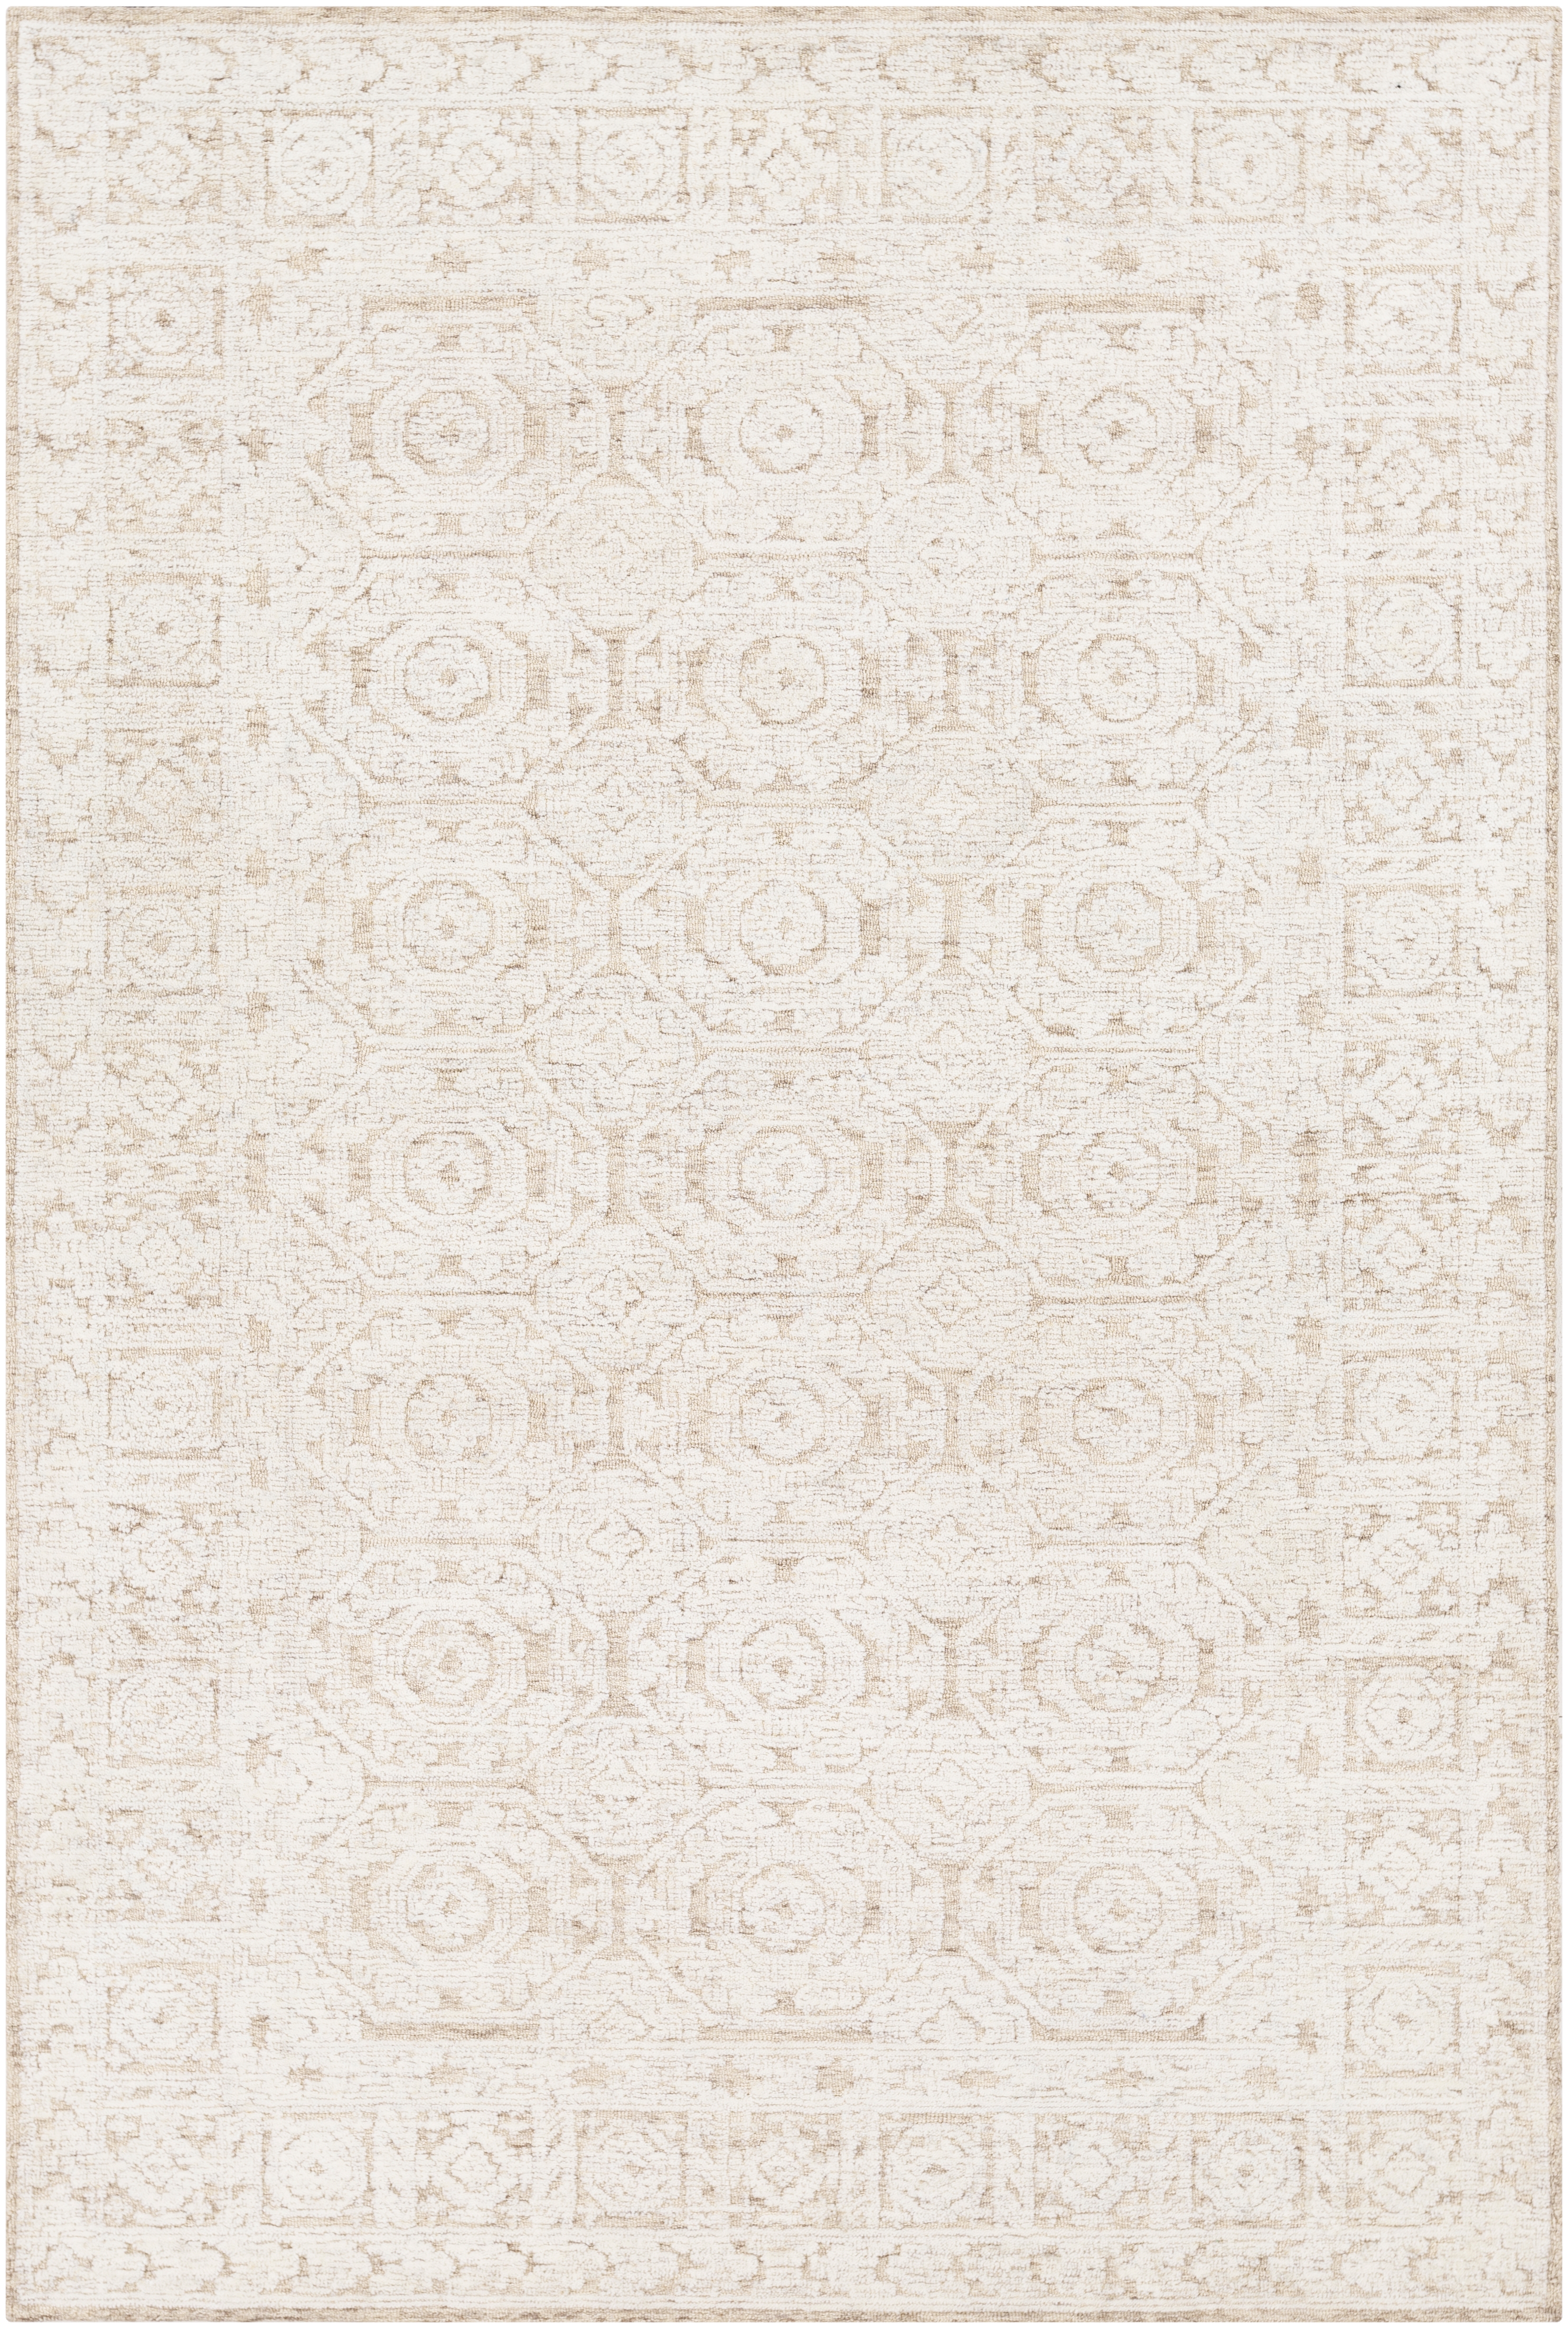 Louvre Rug, 4' x 6' - Image 0